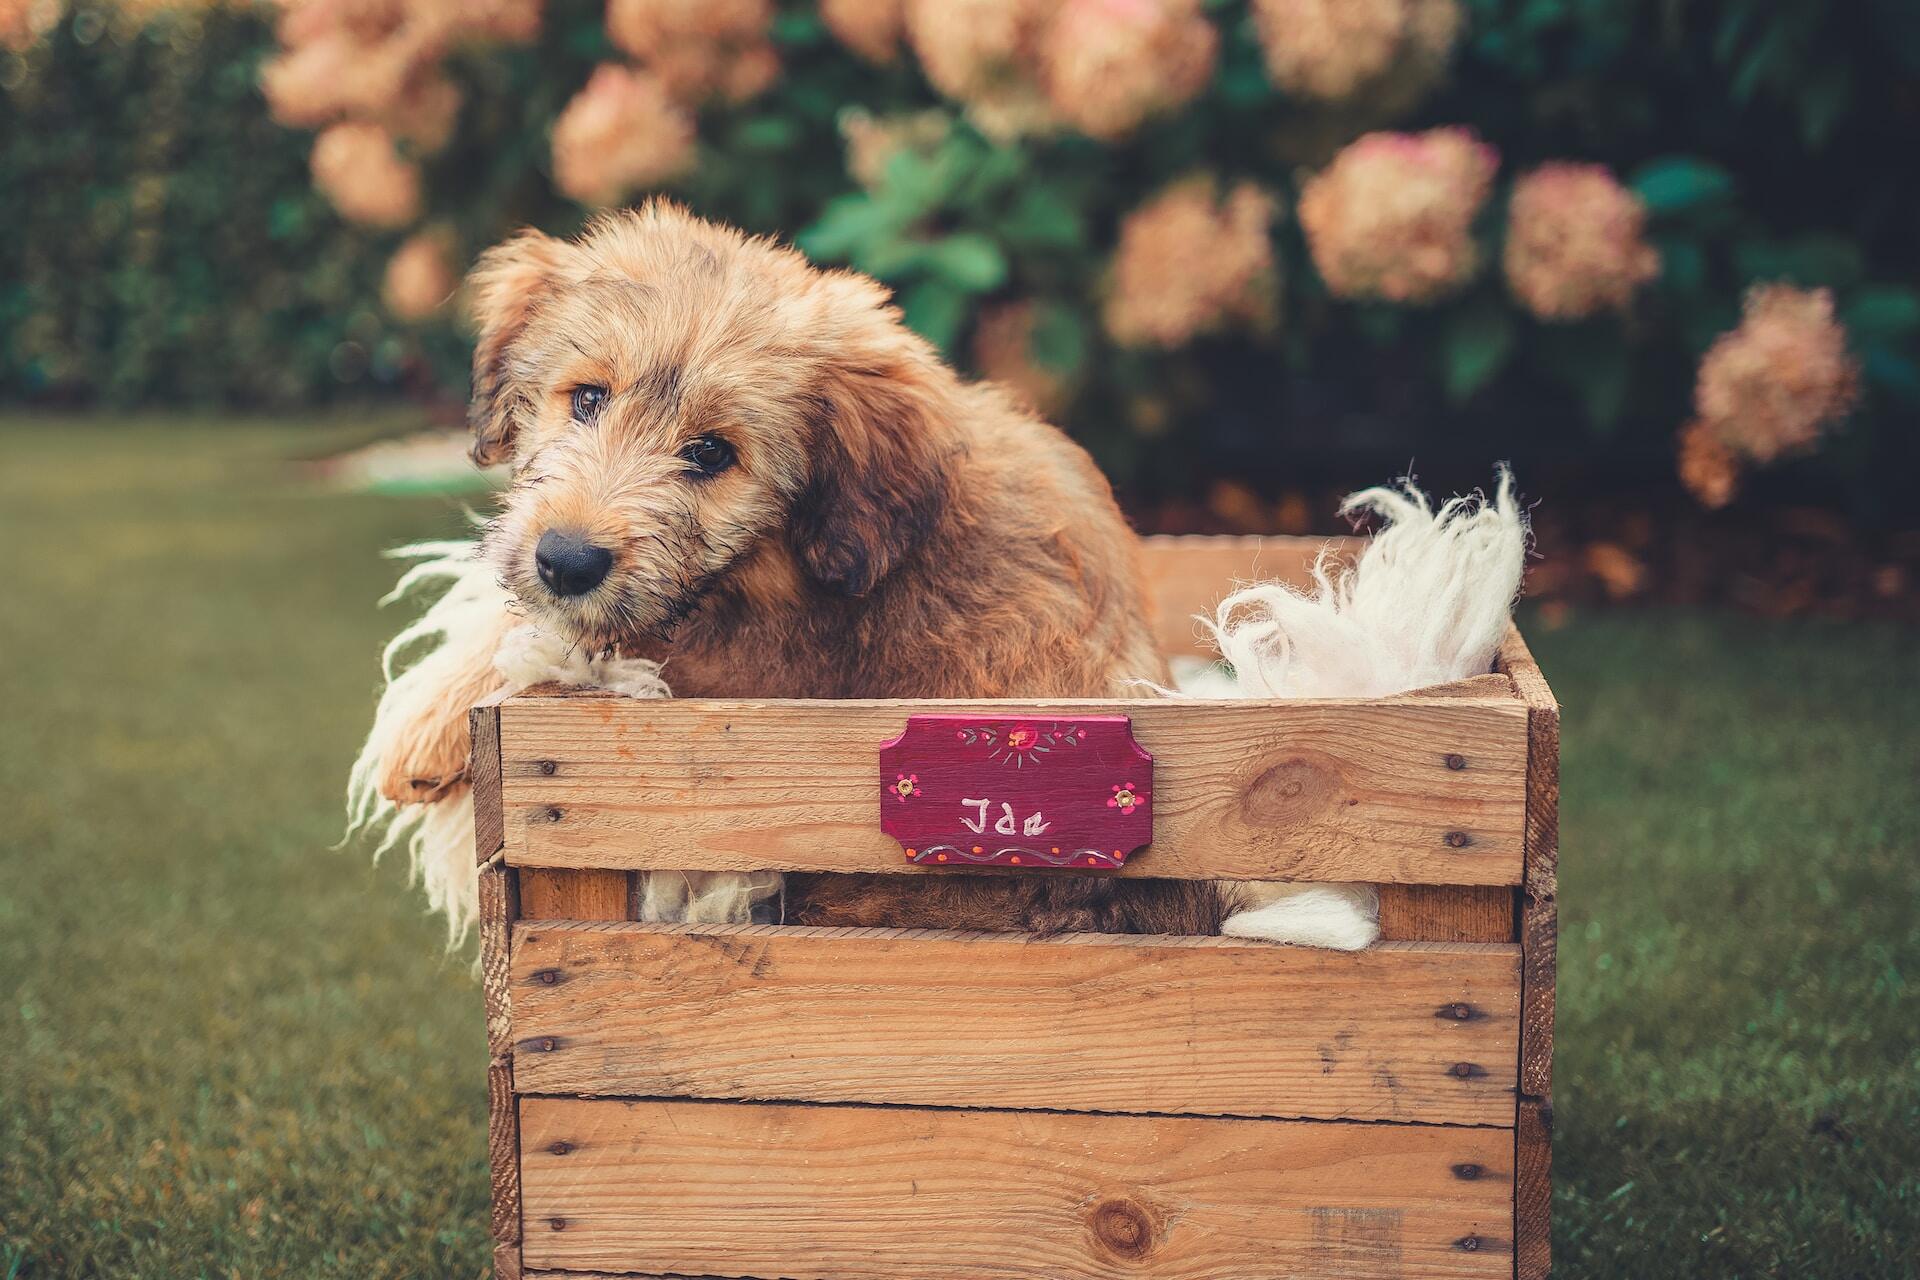 A puppy sitting inside a crate outdoors